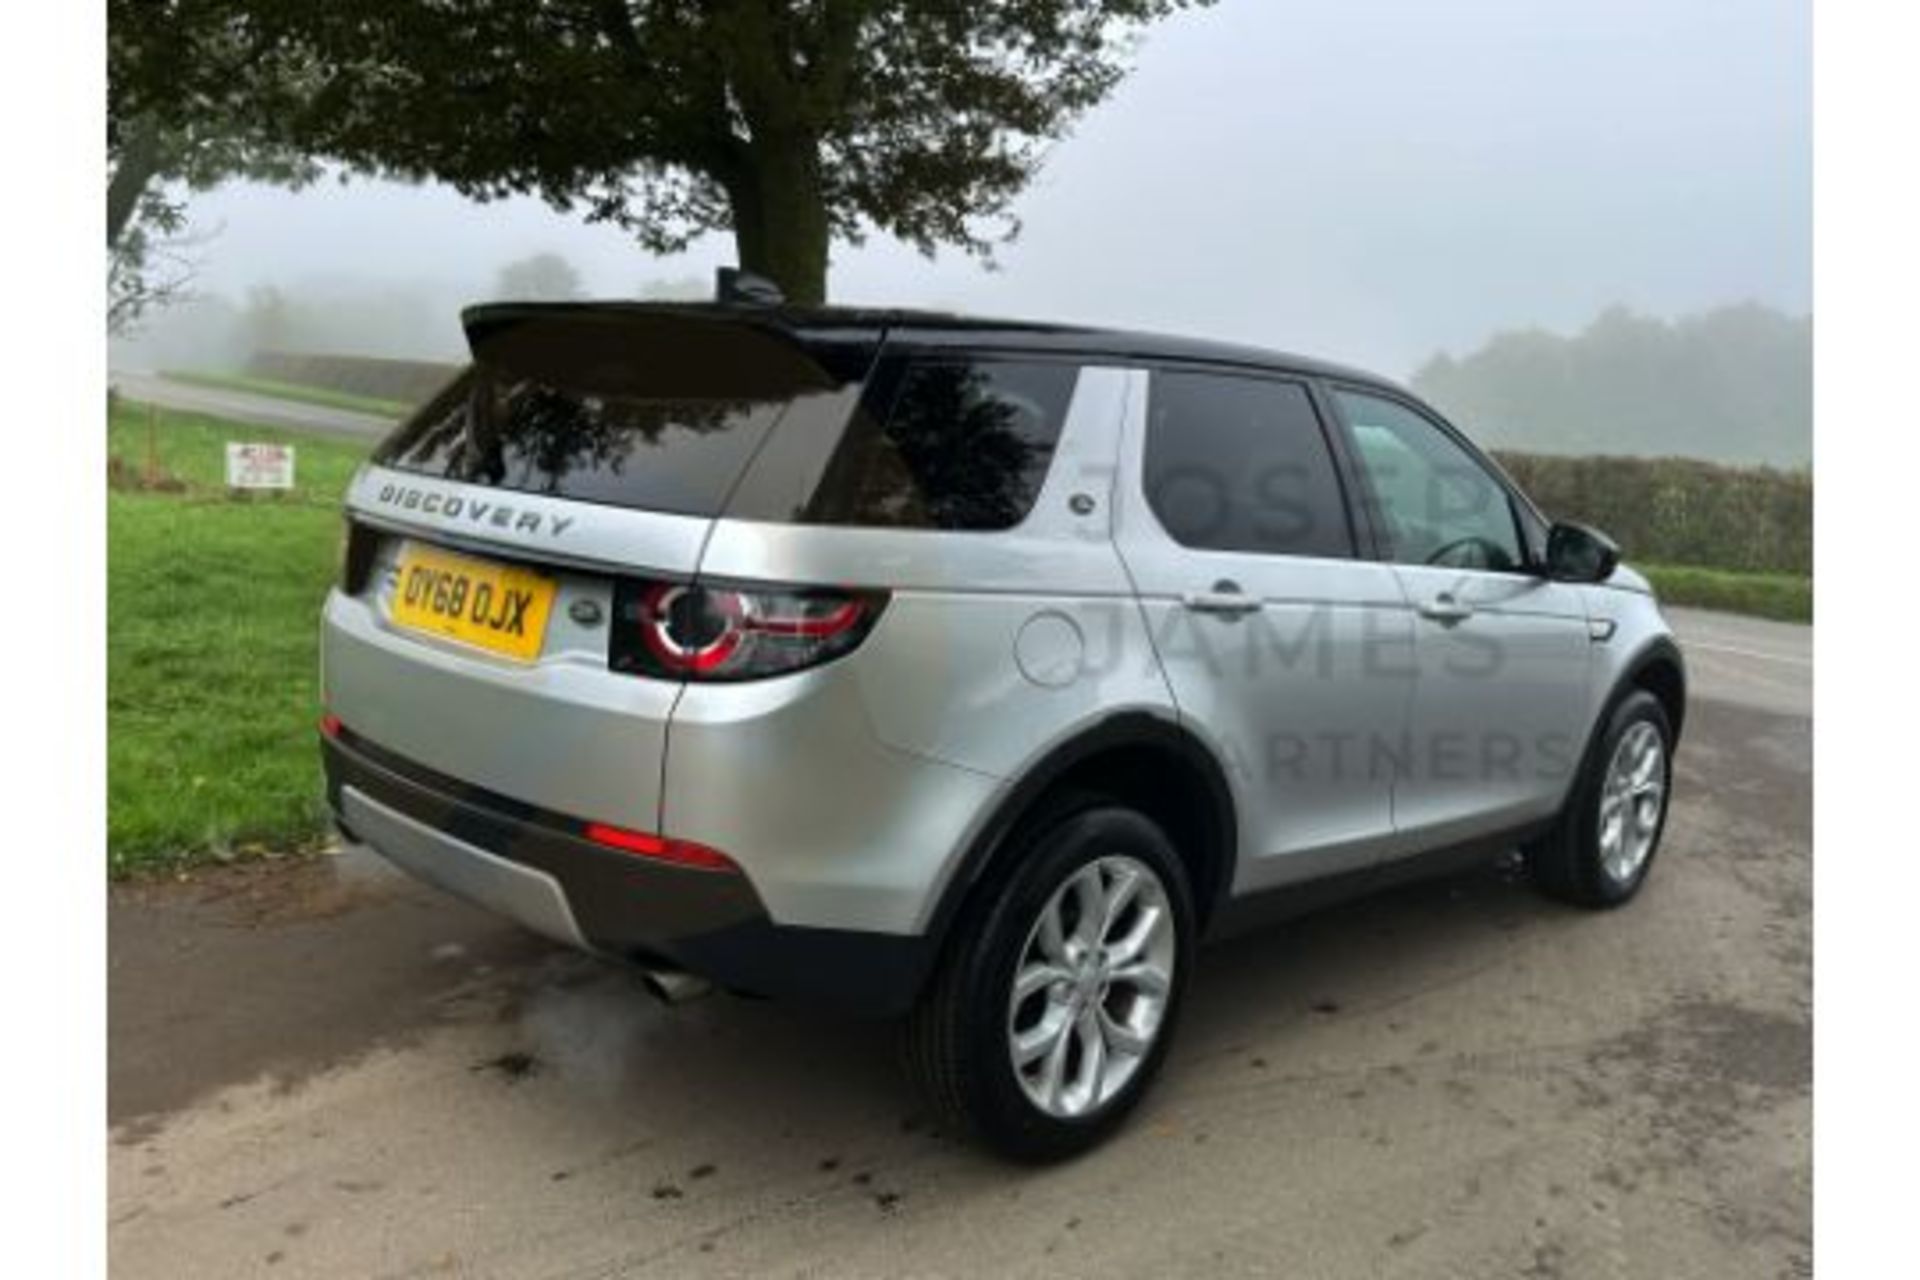 (ON SALE) LANDROVER DISCOVERY SPORT "HSE" EDITION 2.0 TD4 (180) AUTOMATIC - 68 REG - PAN ROOF - Image 11 of 51